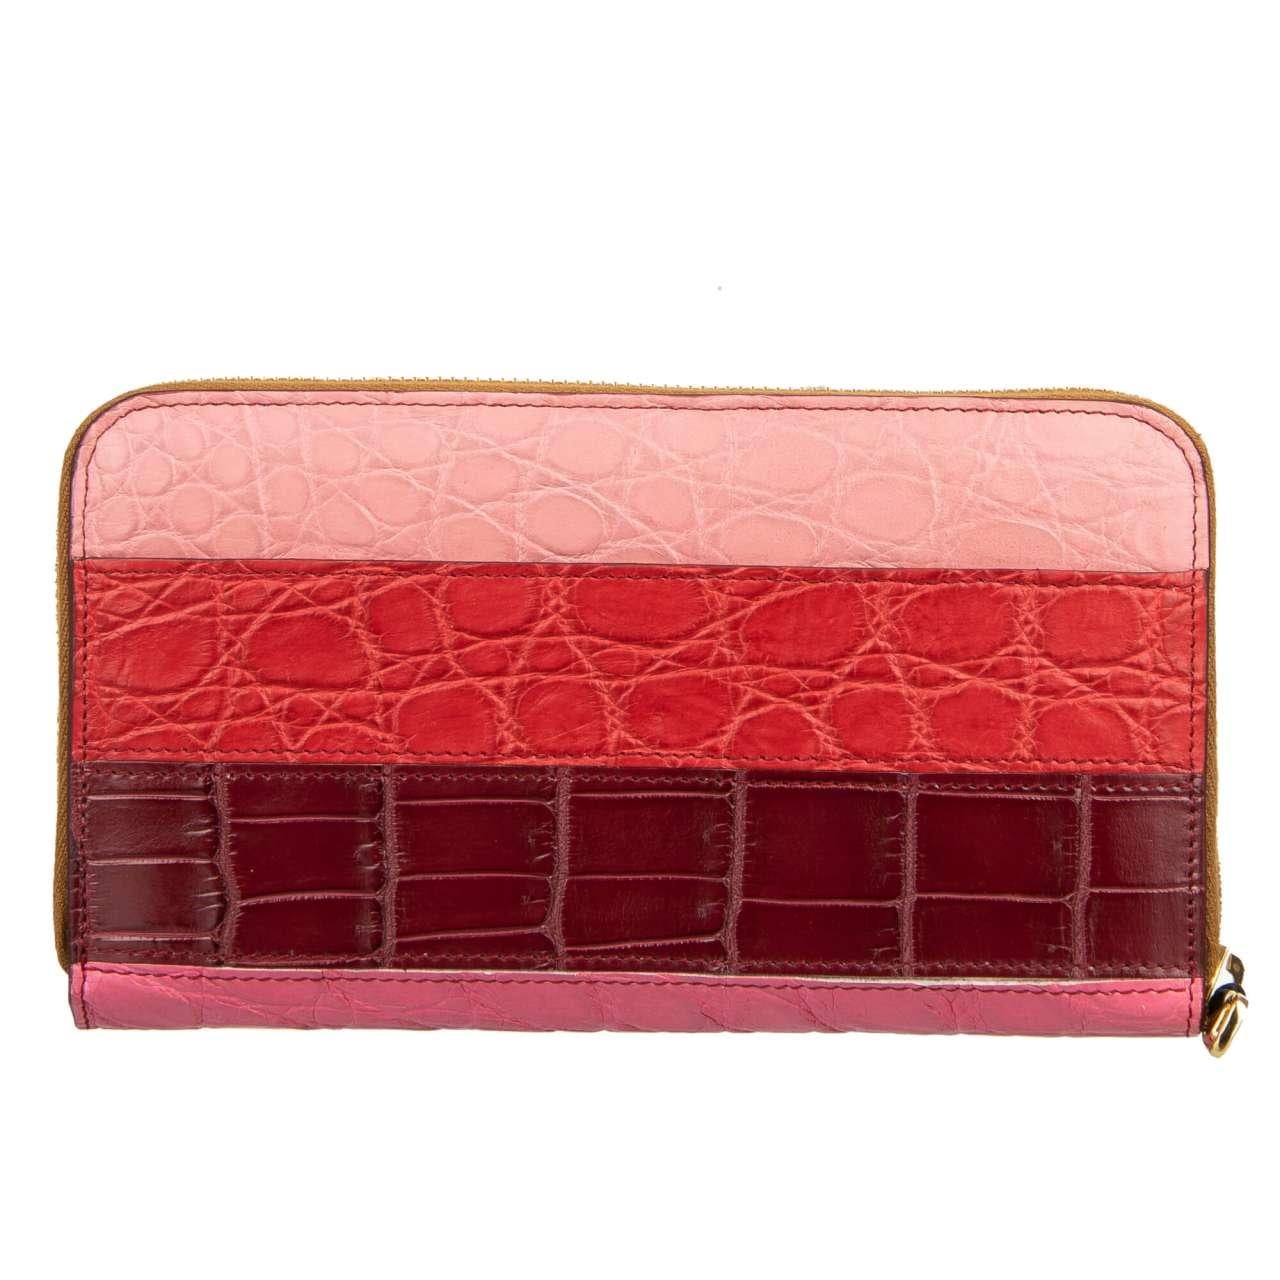 Women's Dolce & Gabbana Striped Patchwork Crocodile Leather Zip-Around Wallet Red Pink For Sale